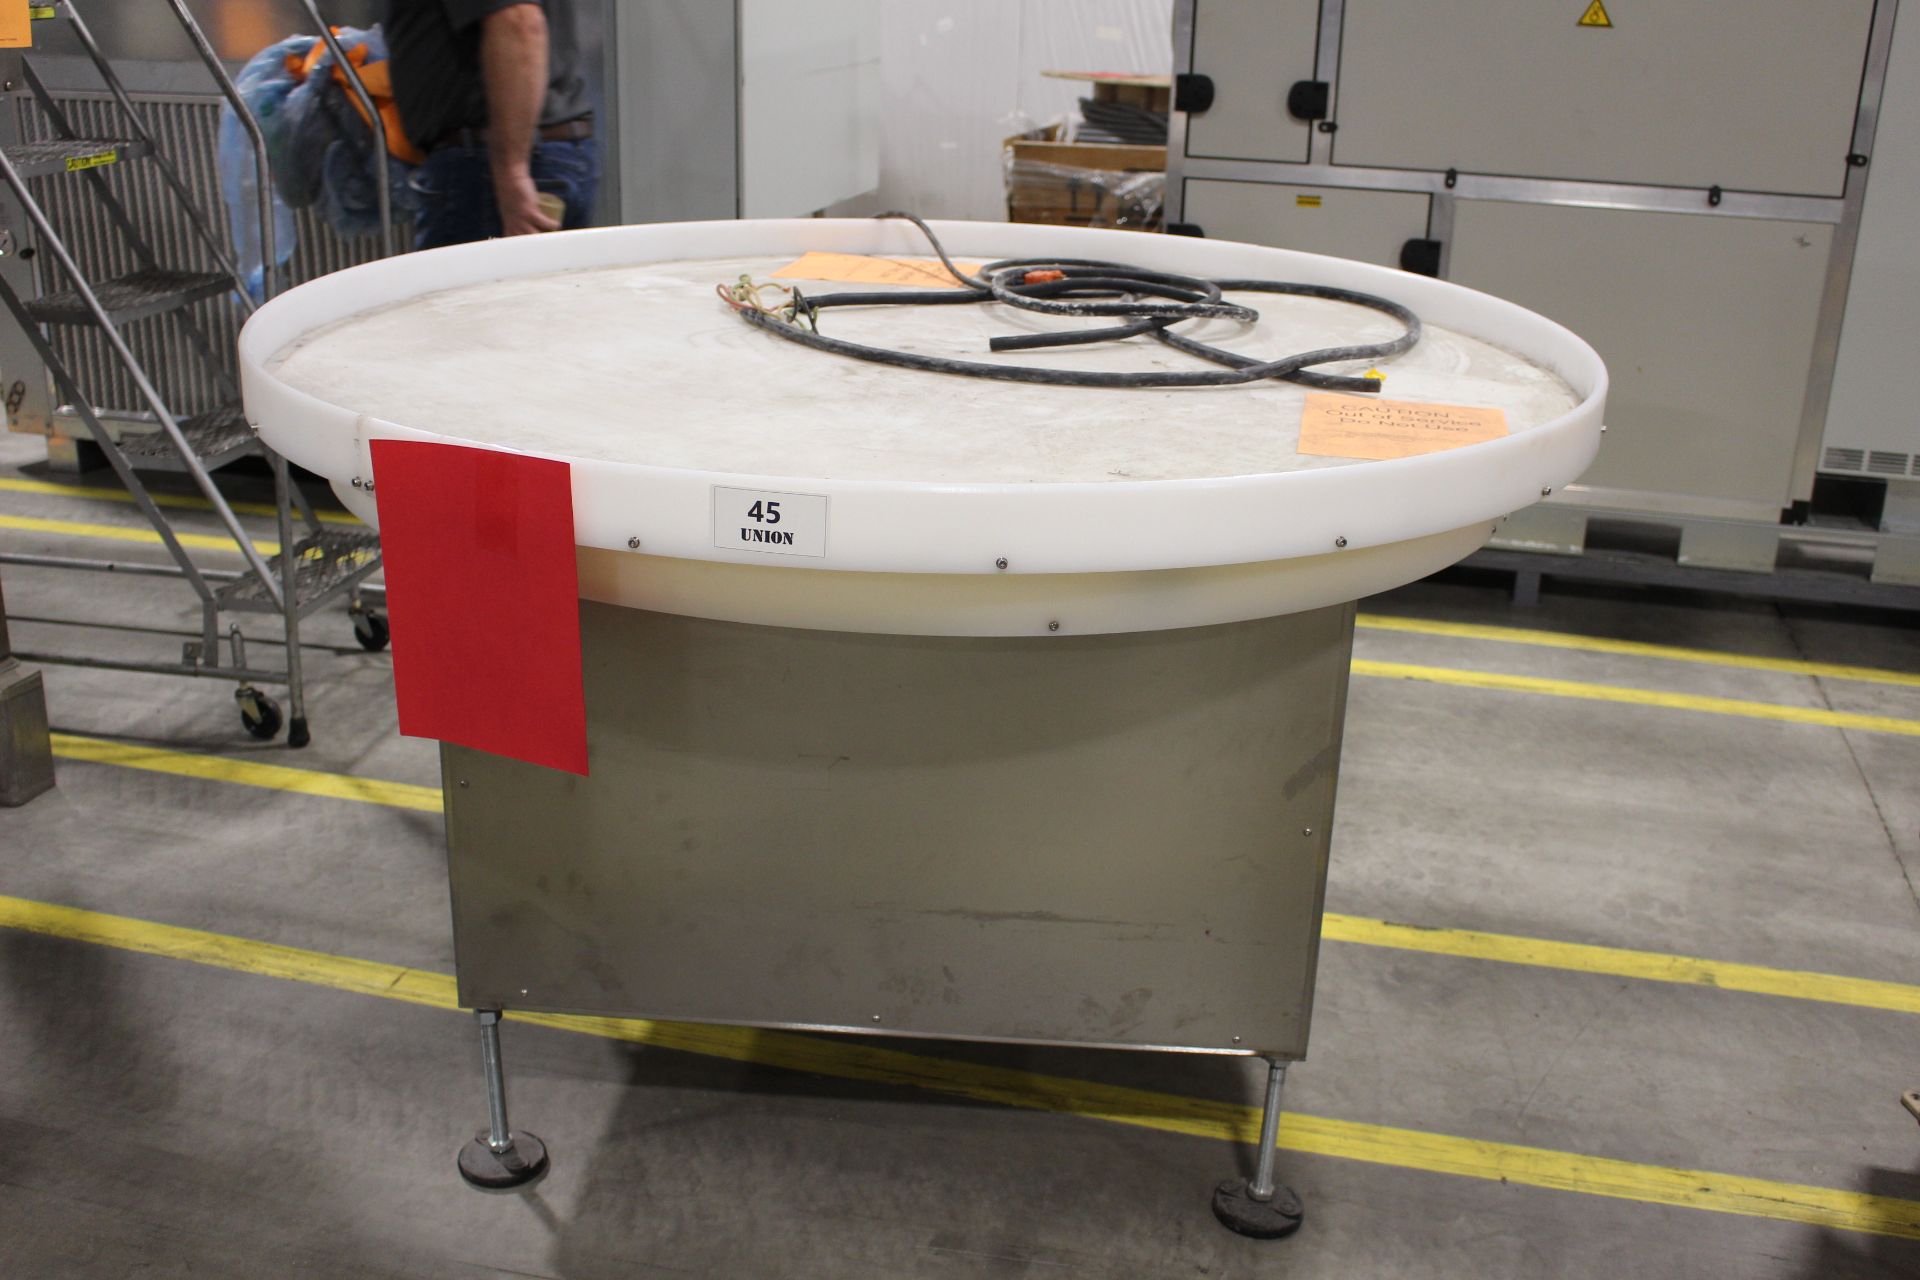 Asset 45 - 60" diameter plastic accumulating table with DC variable speed drive, Simple rigging $75